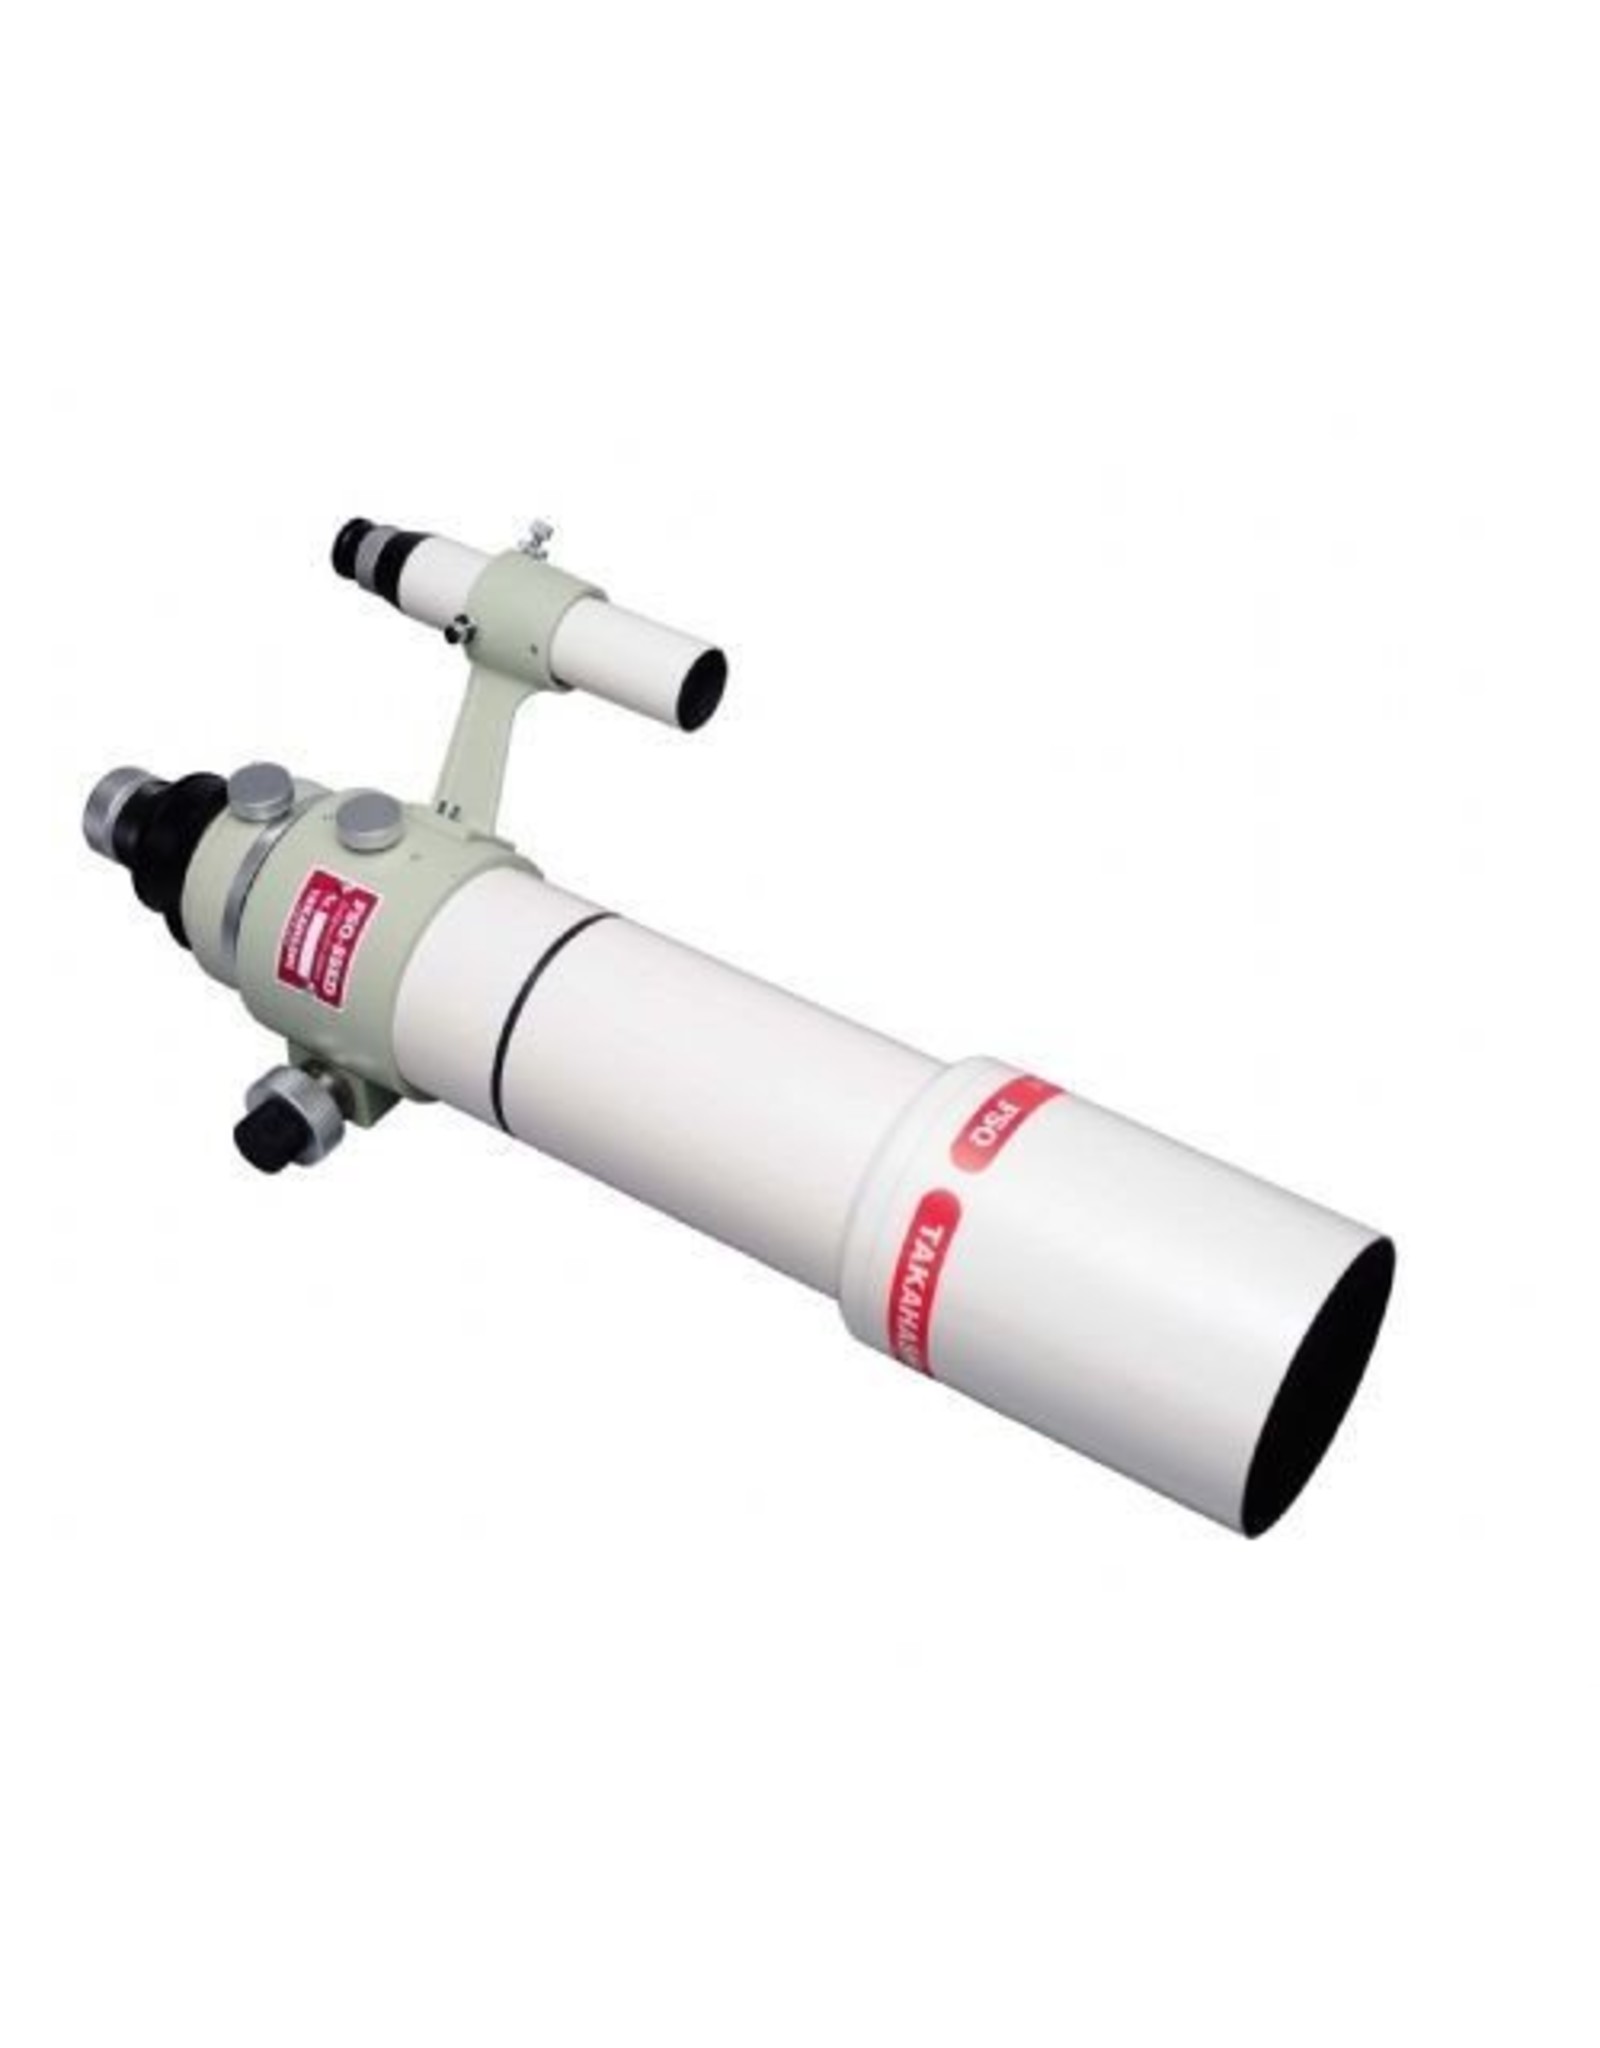 Takahashi Takahashi FSQ-85EDX Astrograph Refractor (No Flattener-Special Order Only)